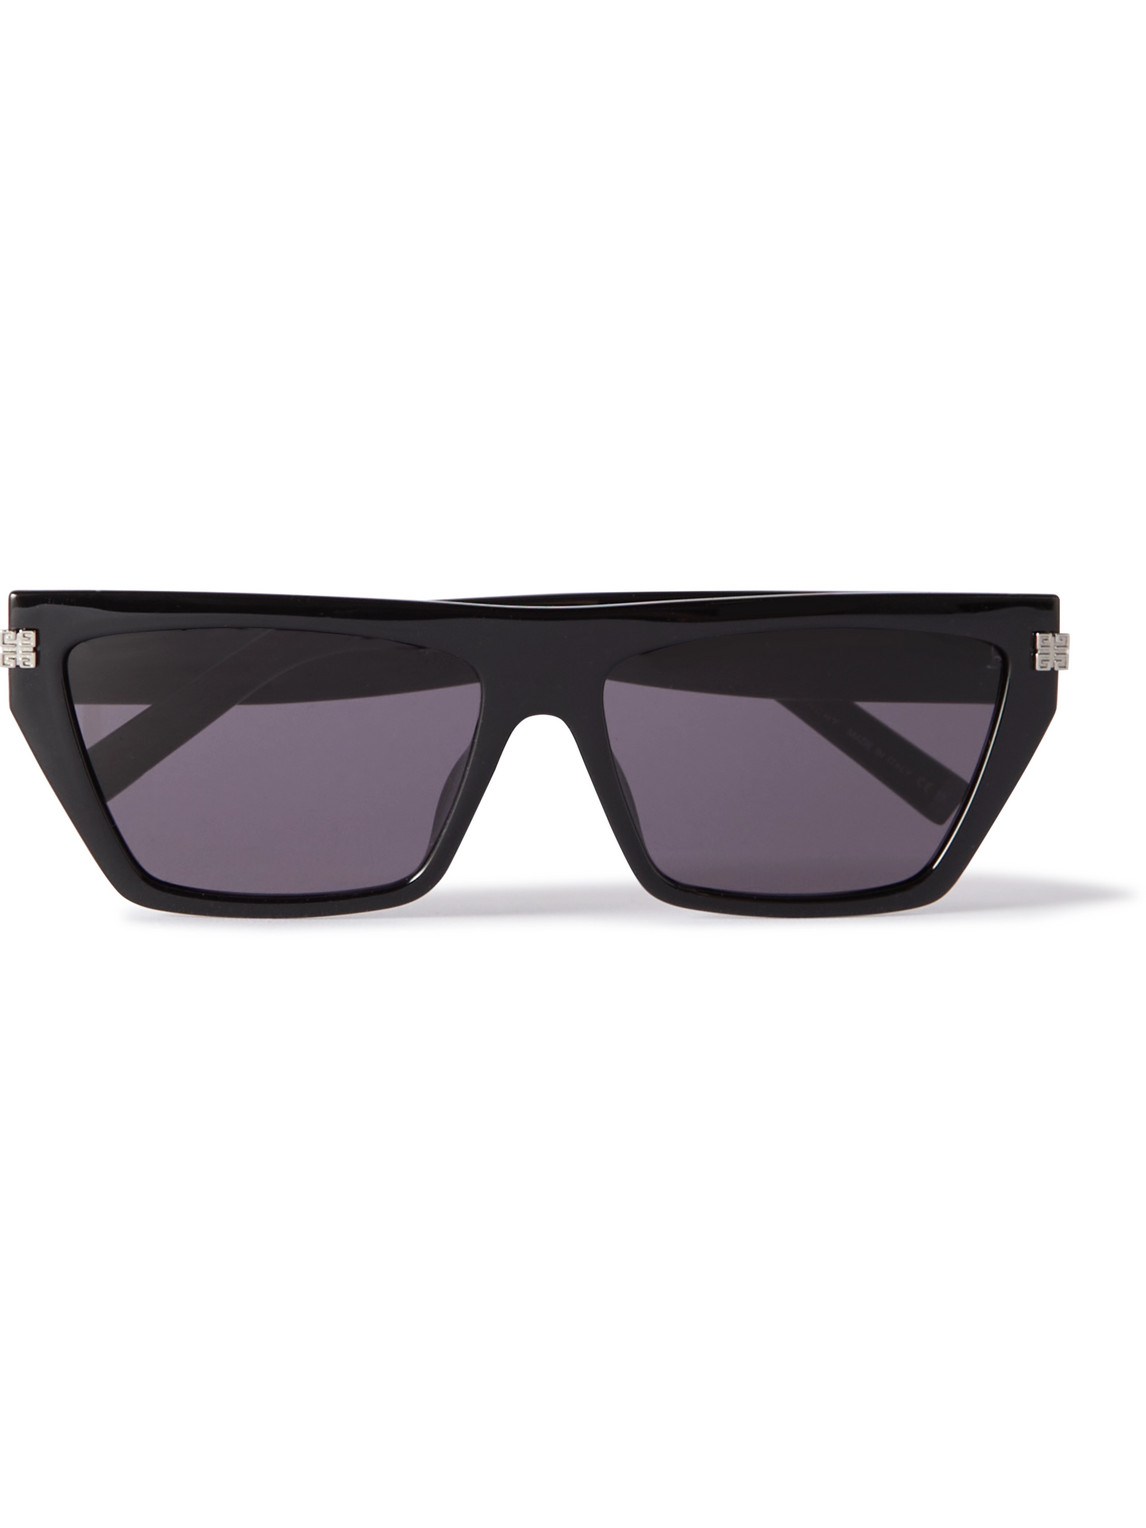 Givenchy Square-frame Acetate And Silver-tone Sunglasses In Black